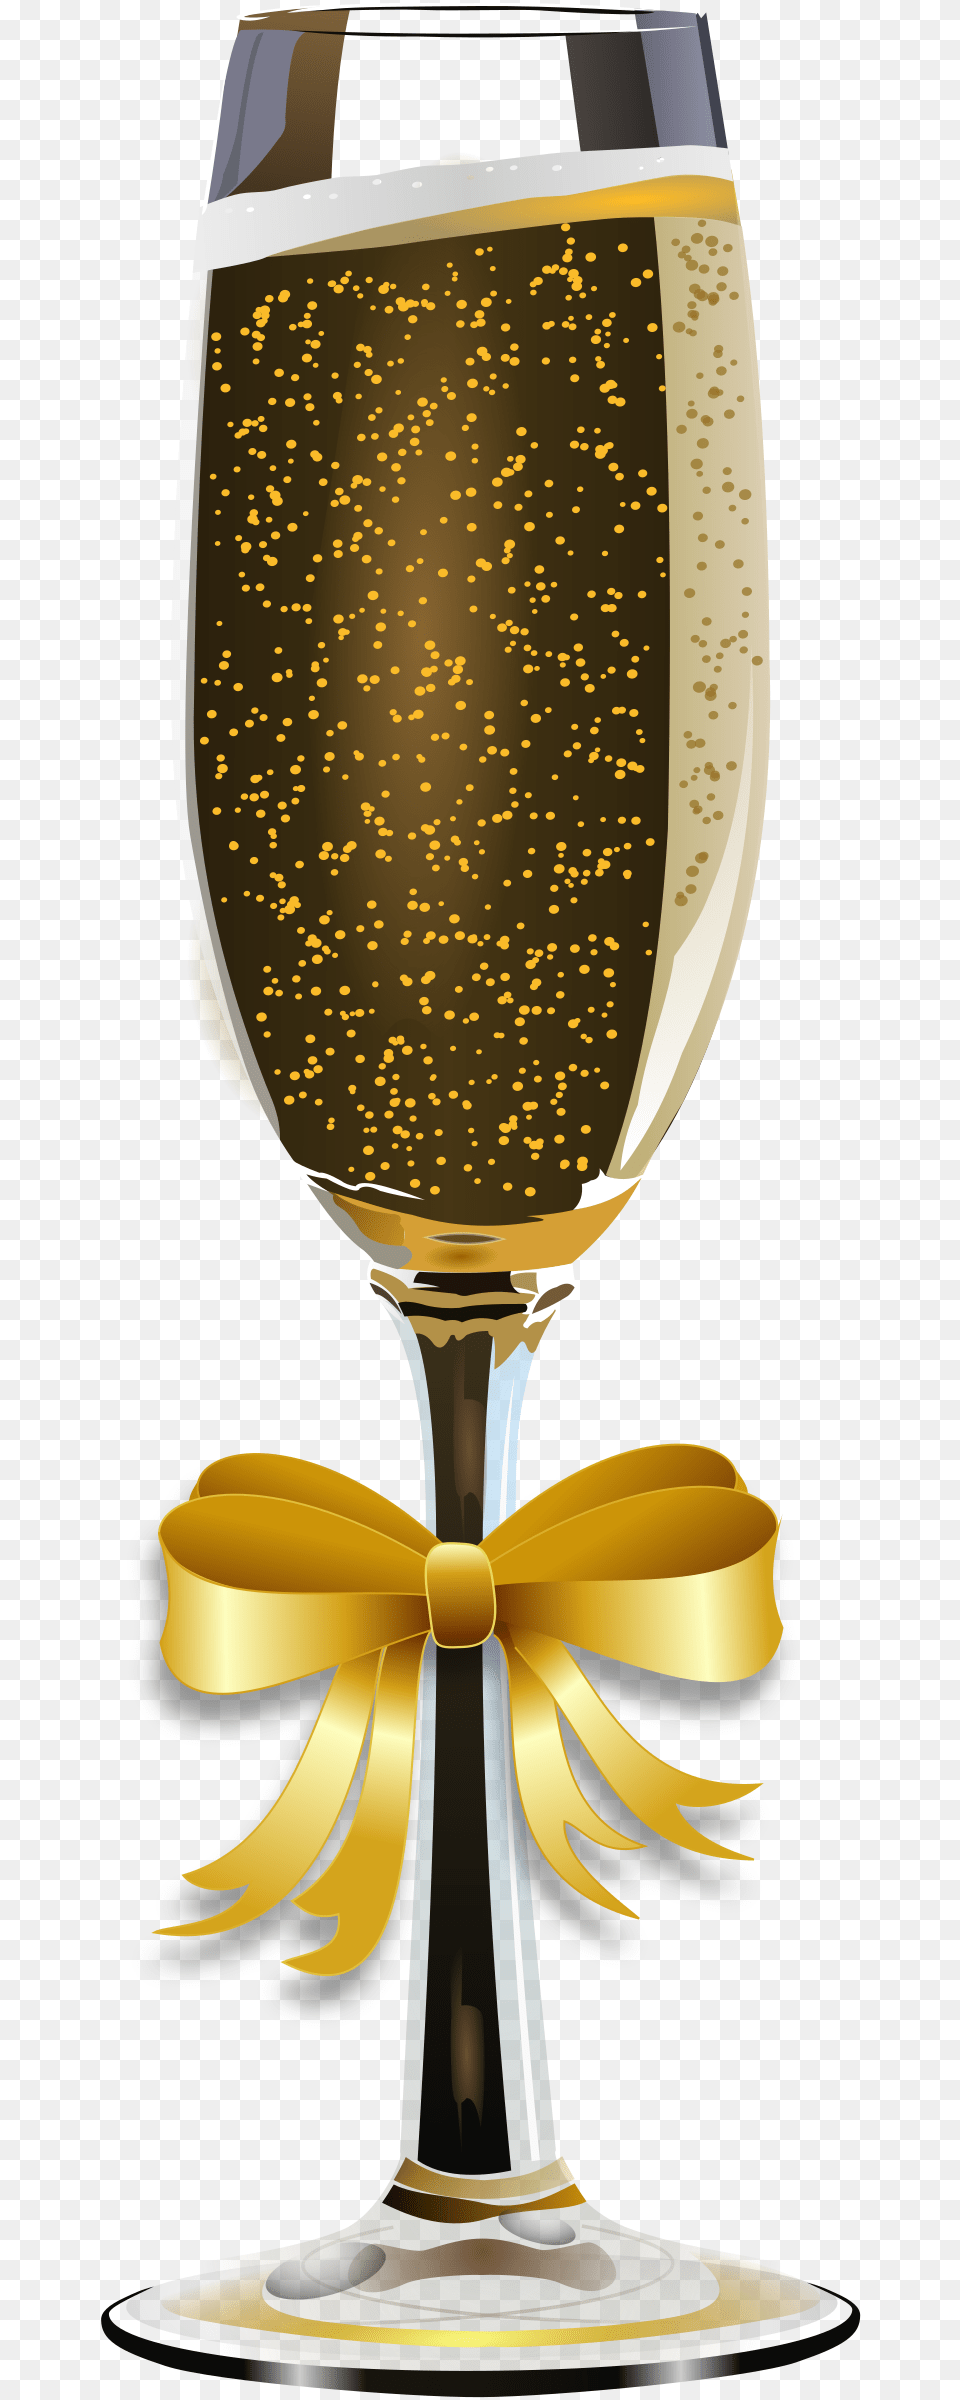 Champagne Glass Remix 2 Clipart Gold Champagne Glass, Alcohol, Beverage, Goblet, Liquor Png Image